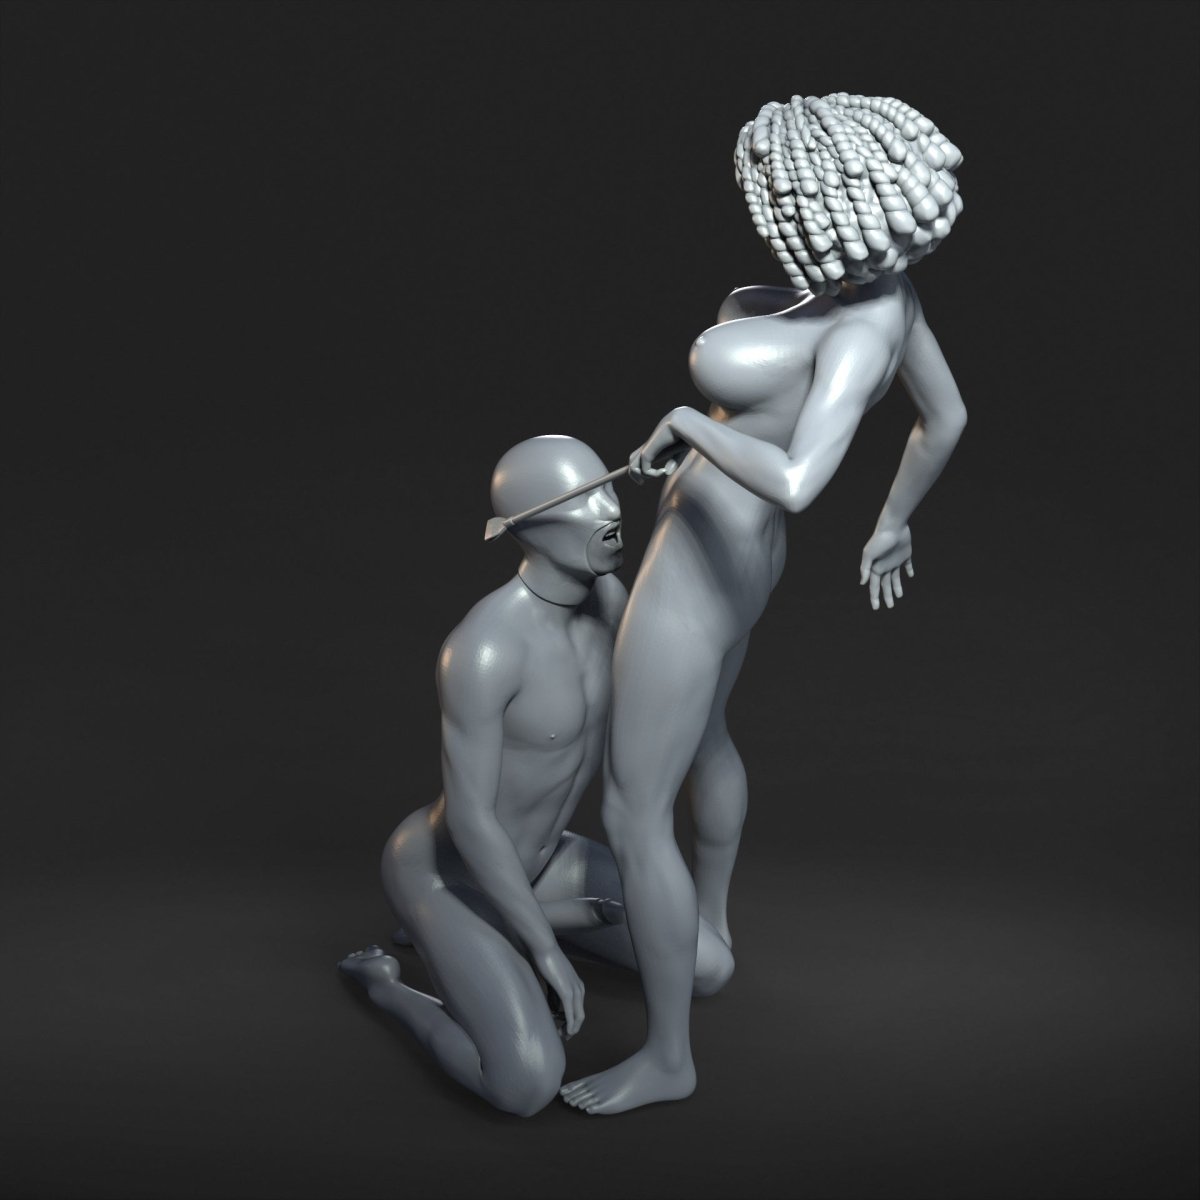 Couple DOMINA 14 Mature 3d Printed miniature FanArt by Masters Of Prints Collectables Statues & Figurines